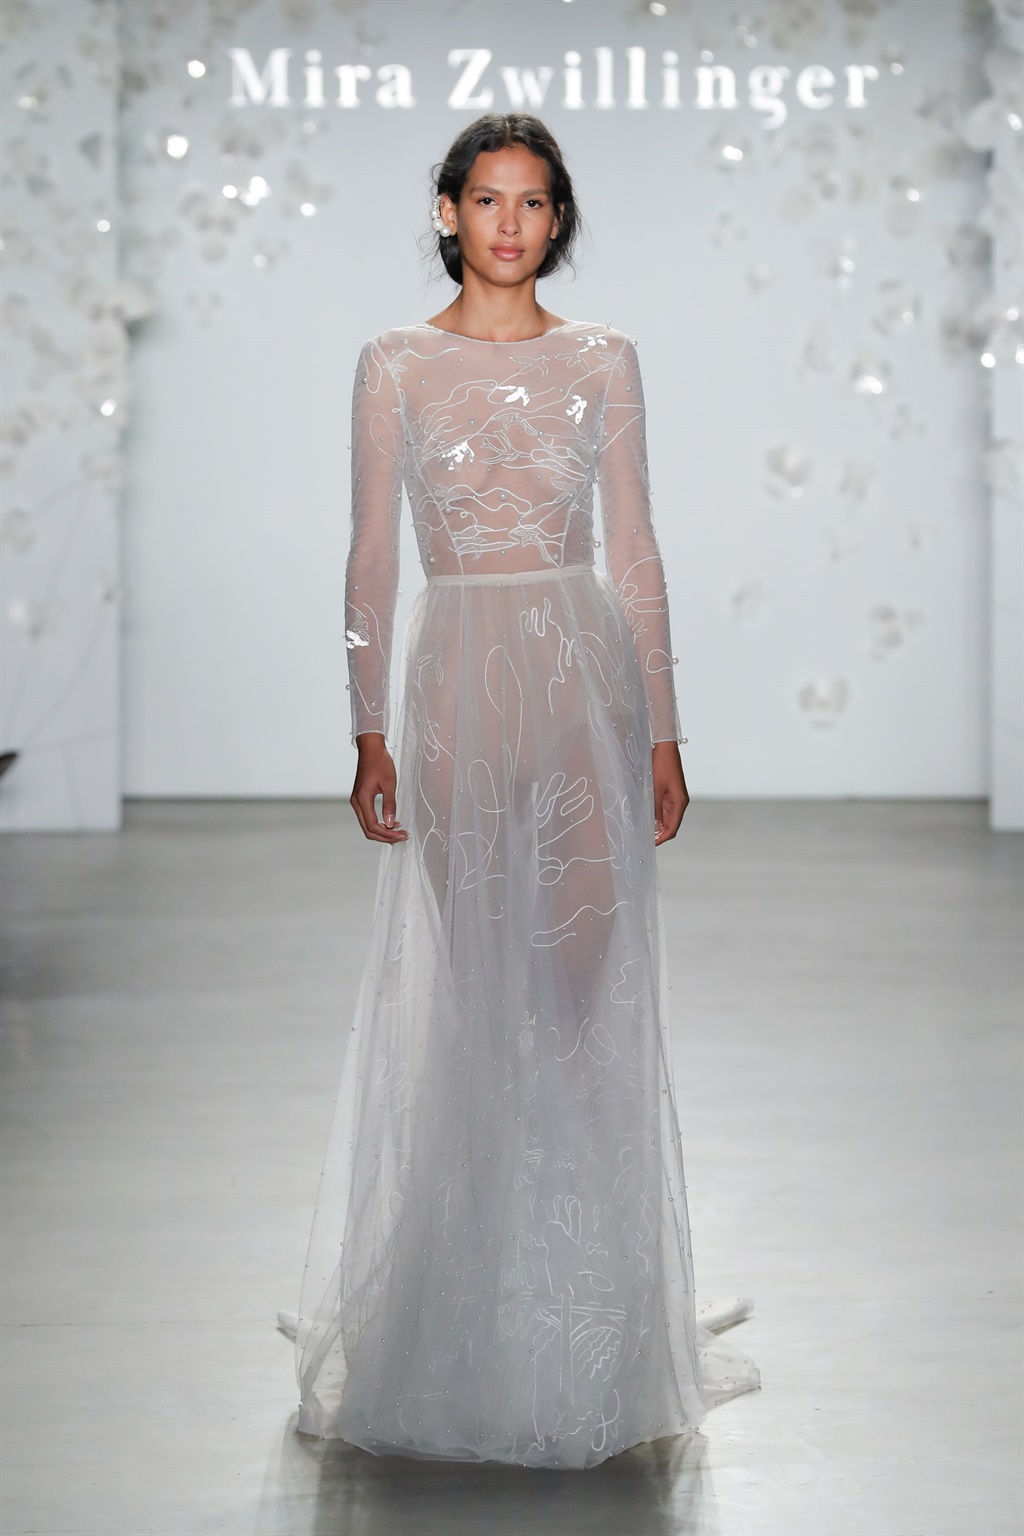 Here are 10 nude wedding dresses straight from the